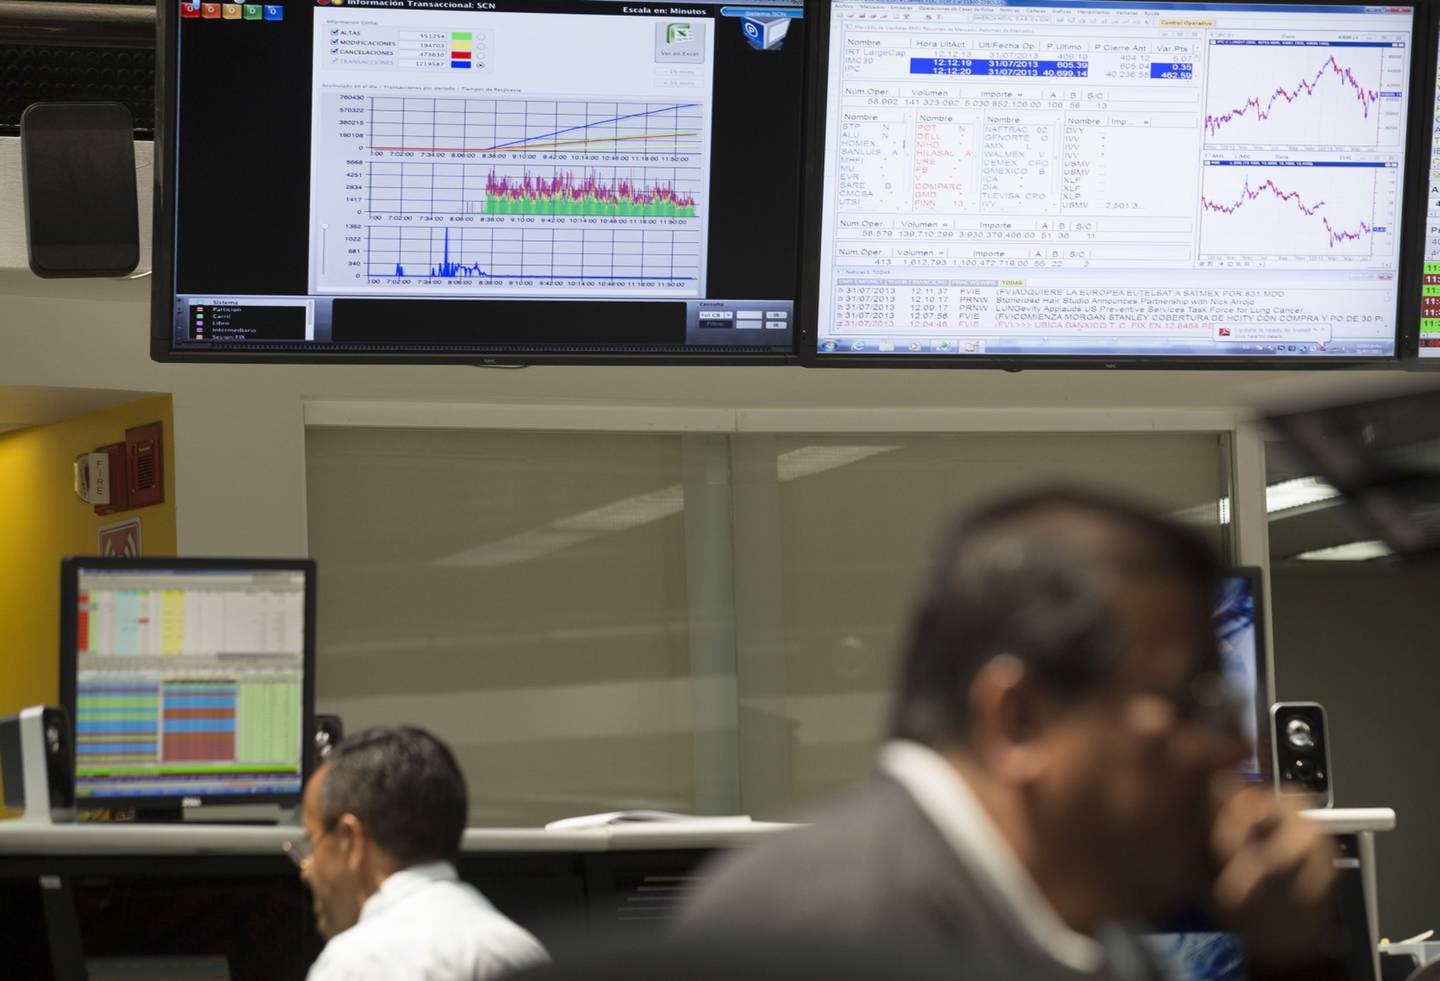 Workers monitor the stock market movement on the trading floor at the Bolsa Mexicana de Valores (BMV), Mexico's stock exchange, in Mexico City.